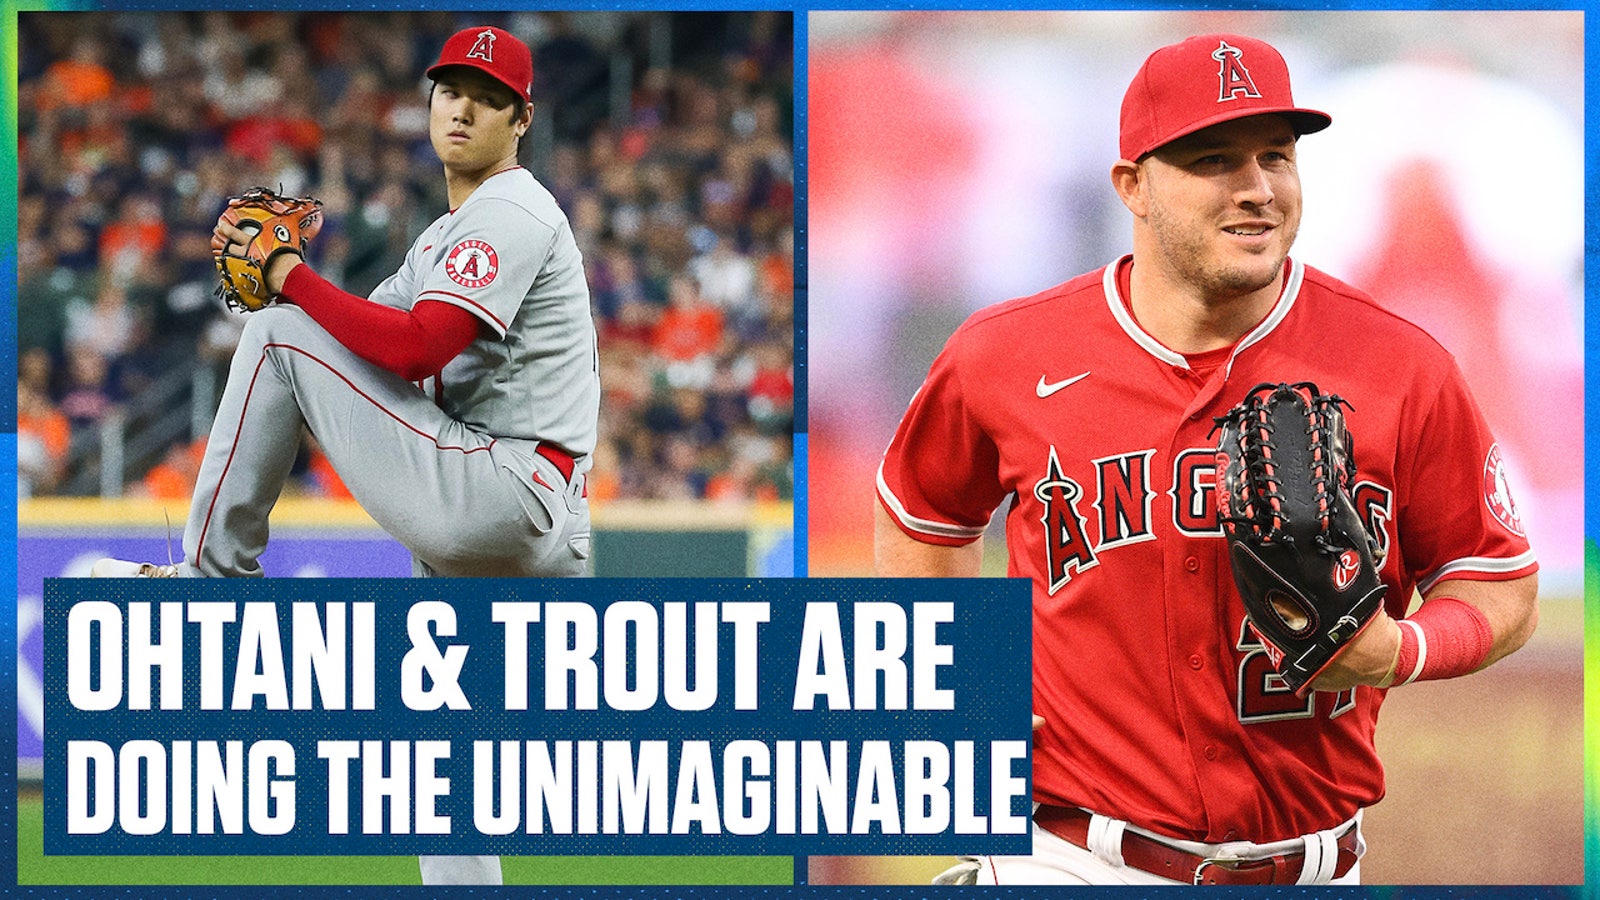 Shohei Ohtani and Mike Trout rewrite Angels history together